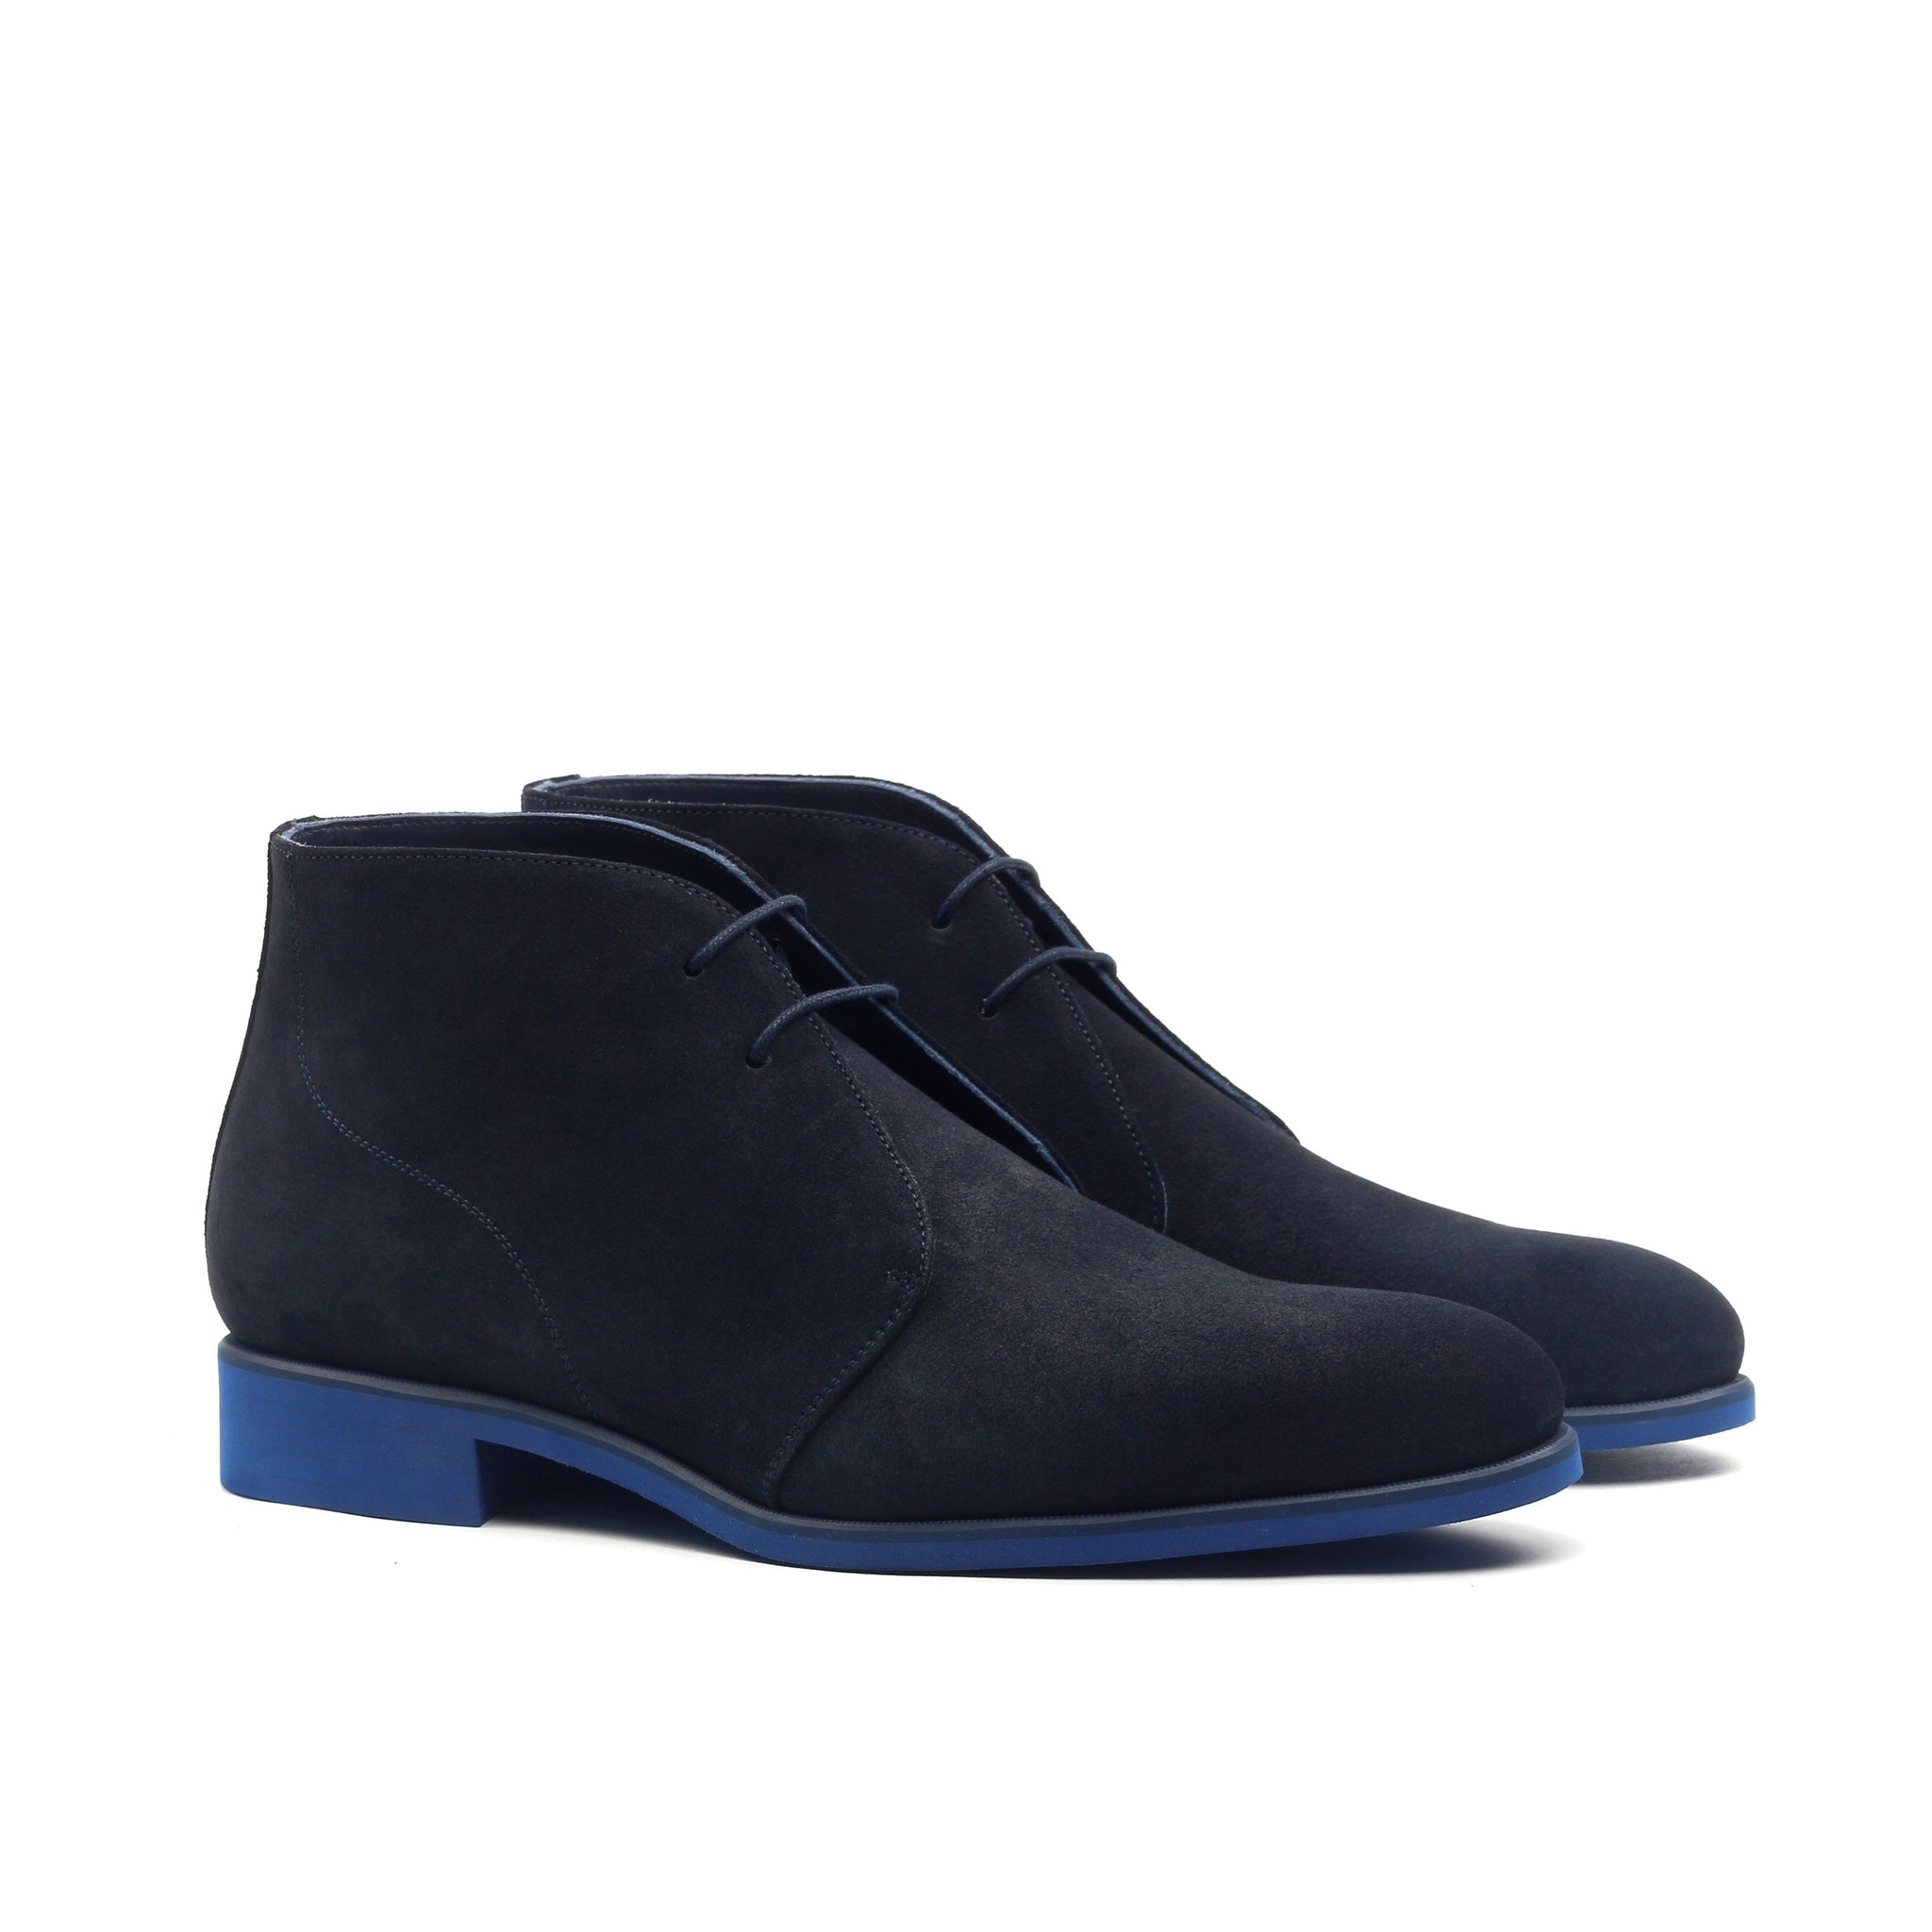 Unique Handcrafted Navy Blue Lux Suede Chukka Boot